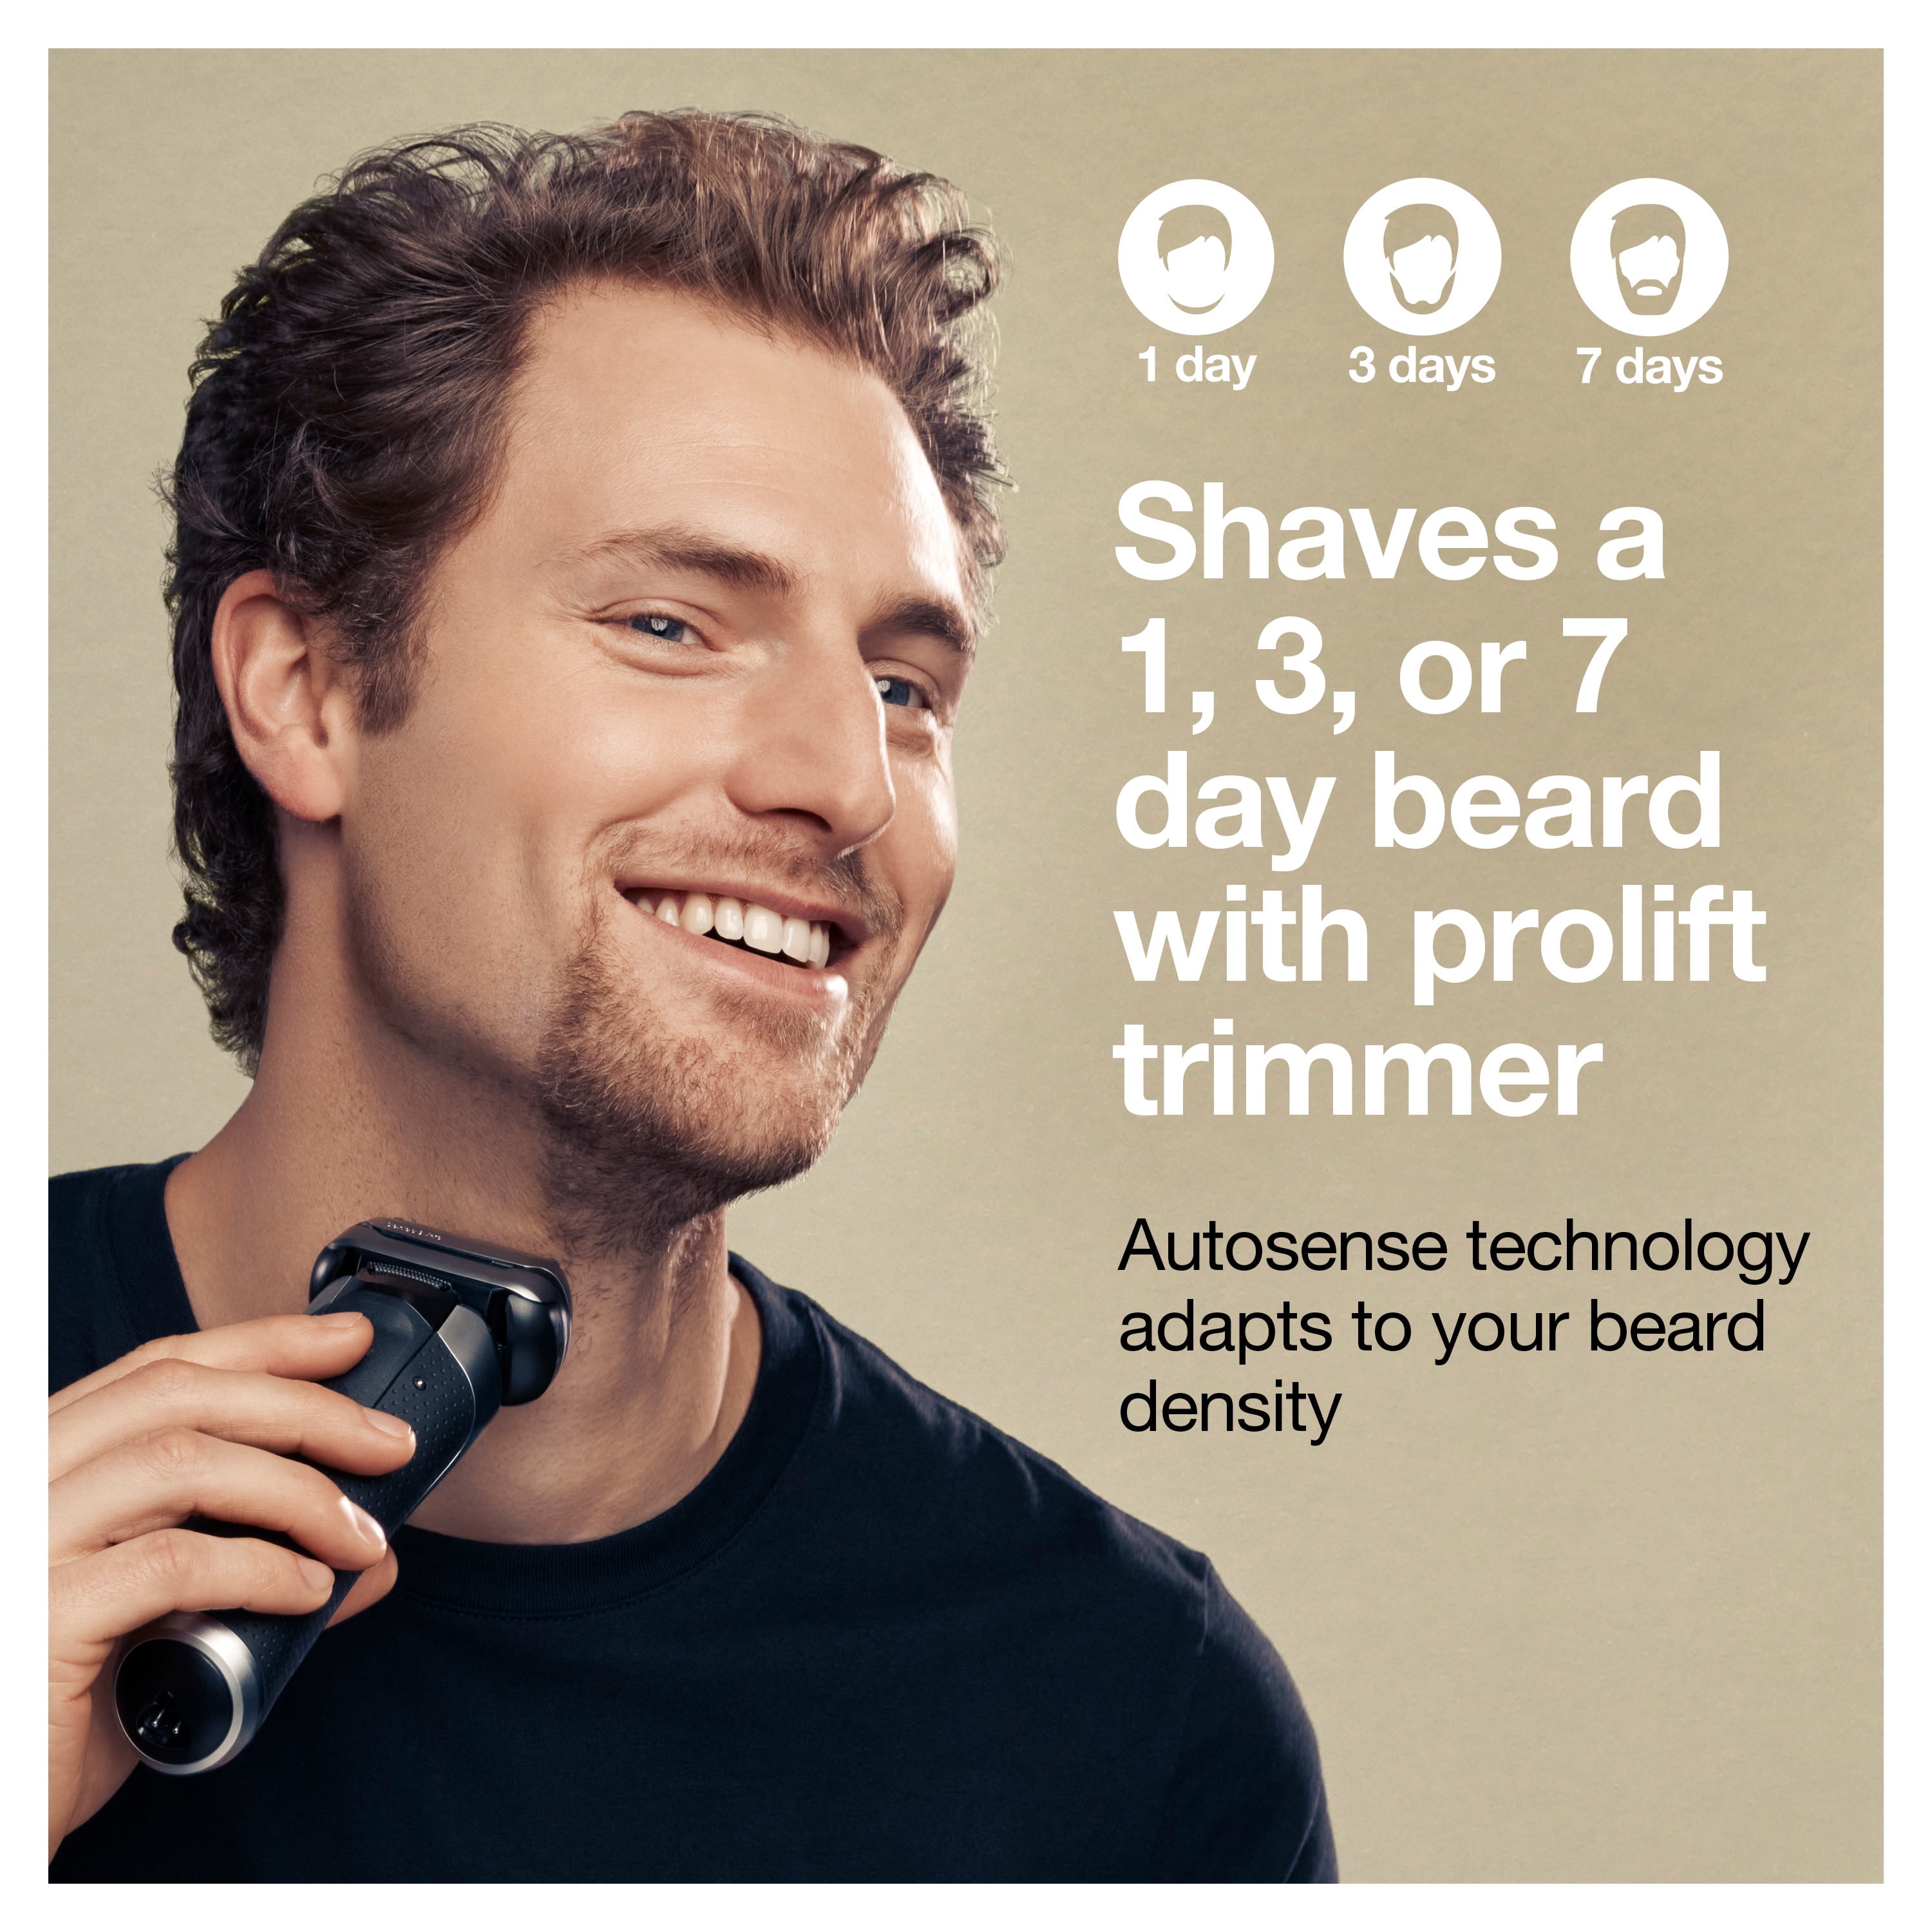 Braun Series 9 Pro 9477cc Electric Shaver with PowerCase - Black/Silver  New/Open 69055889923